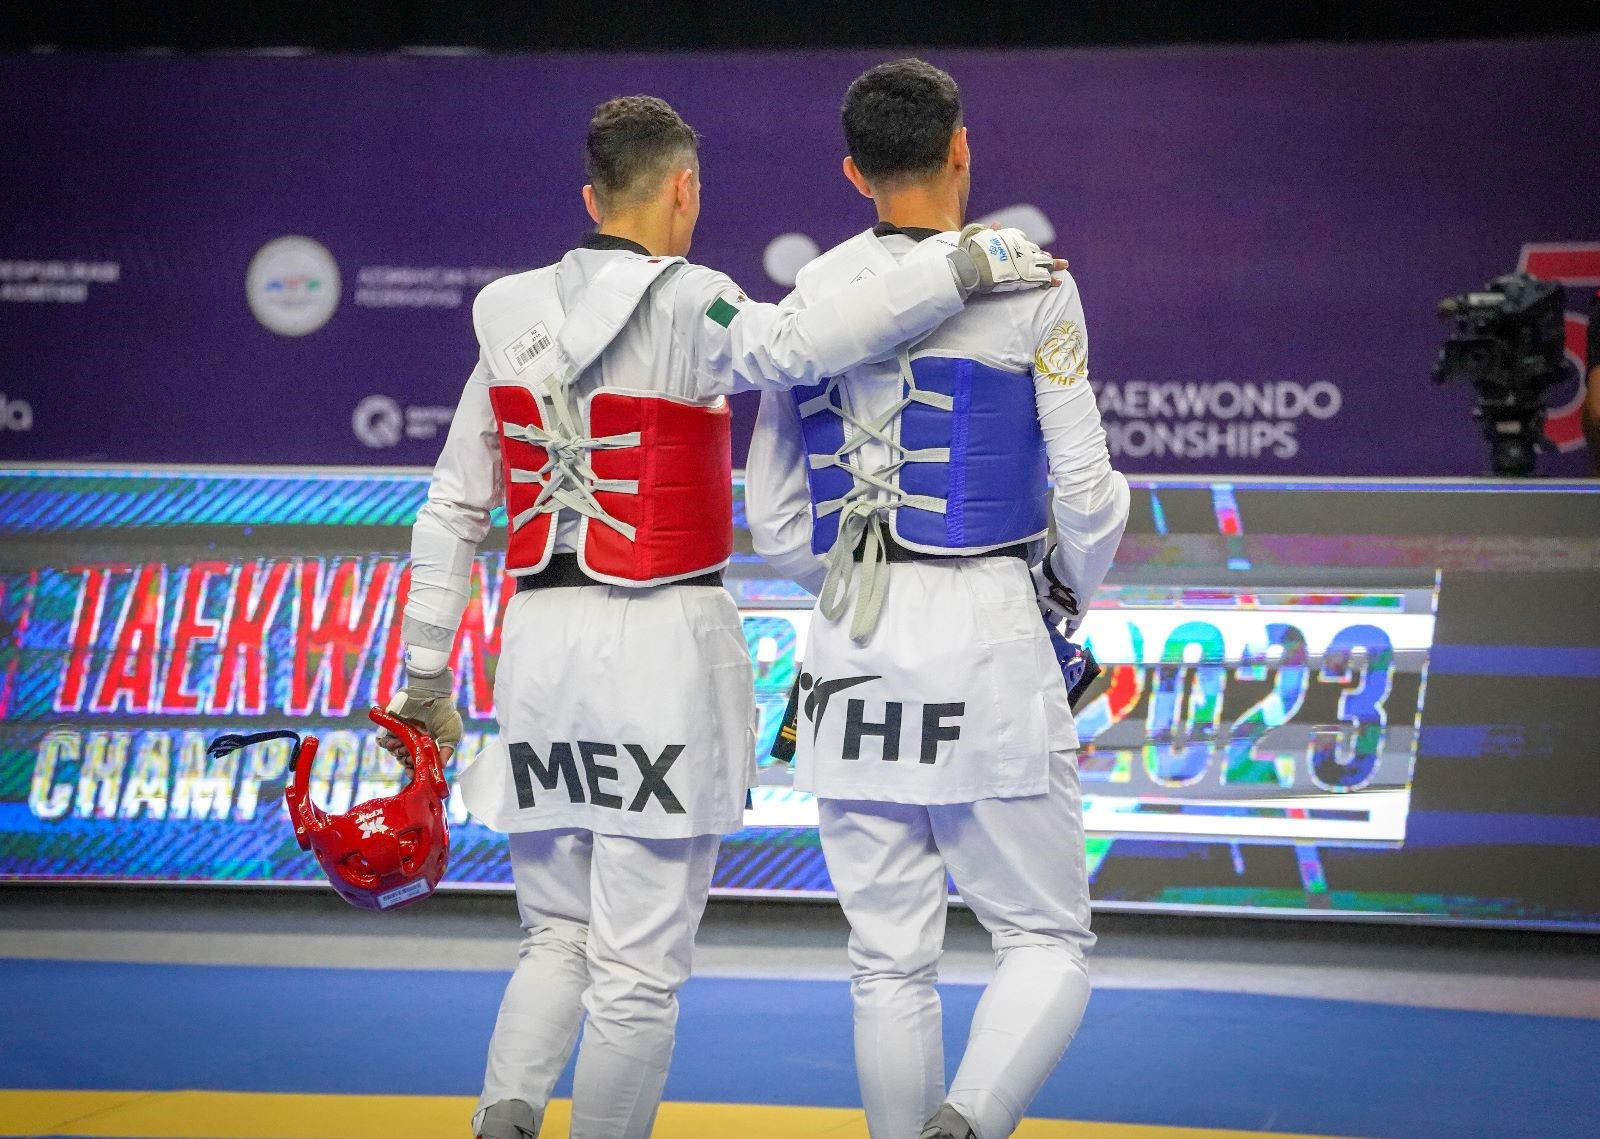 Yehya Al Ghotani, right, became the first Refugee Team Athlete from the Azraq Camp to compete at a World Taekwondo Championships against Mexico's Carlos Navarro, left ©World Taekwondo